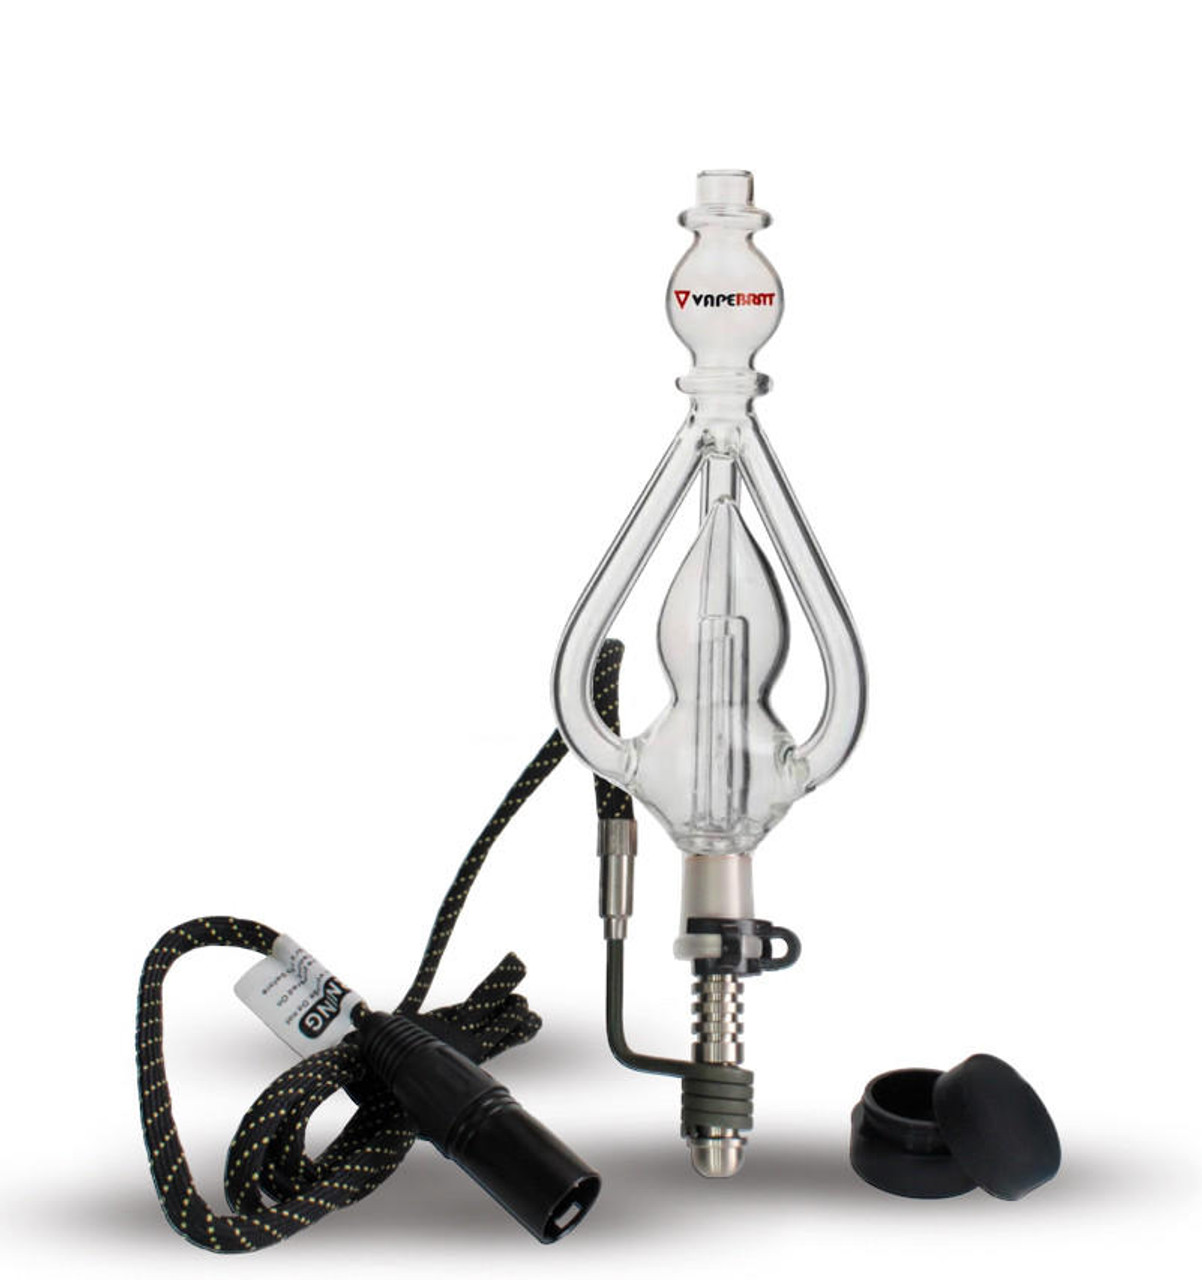 Electric Nectar Collector Enail Coil Kit: Recycler Dab Straw